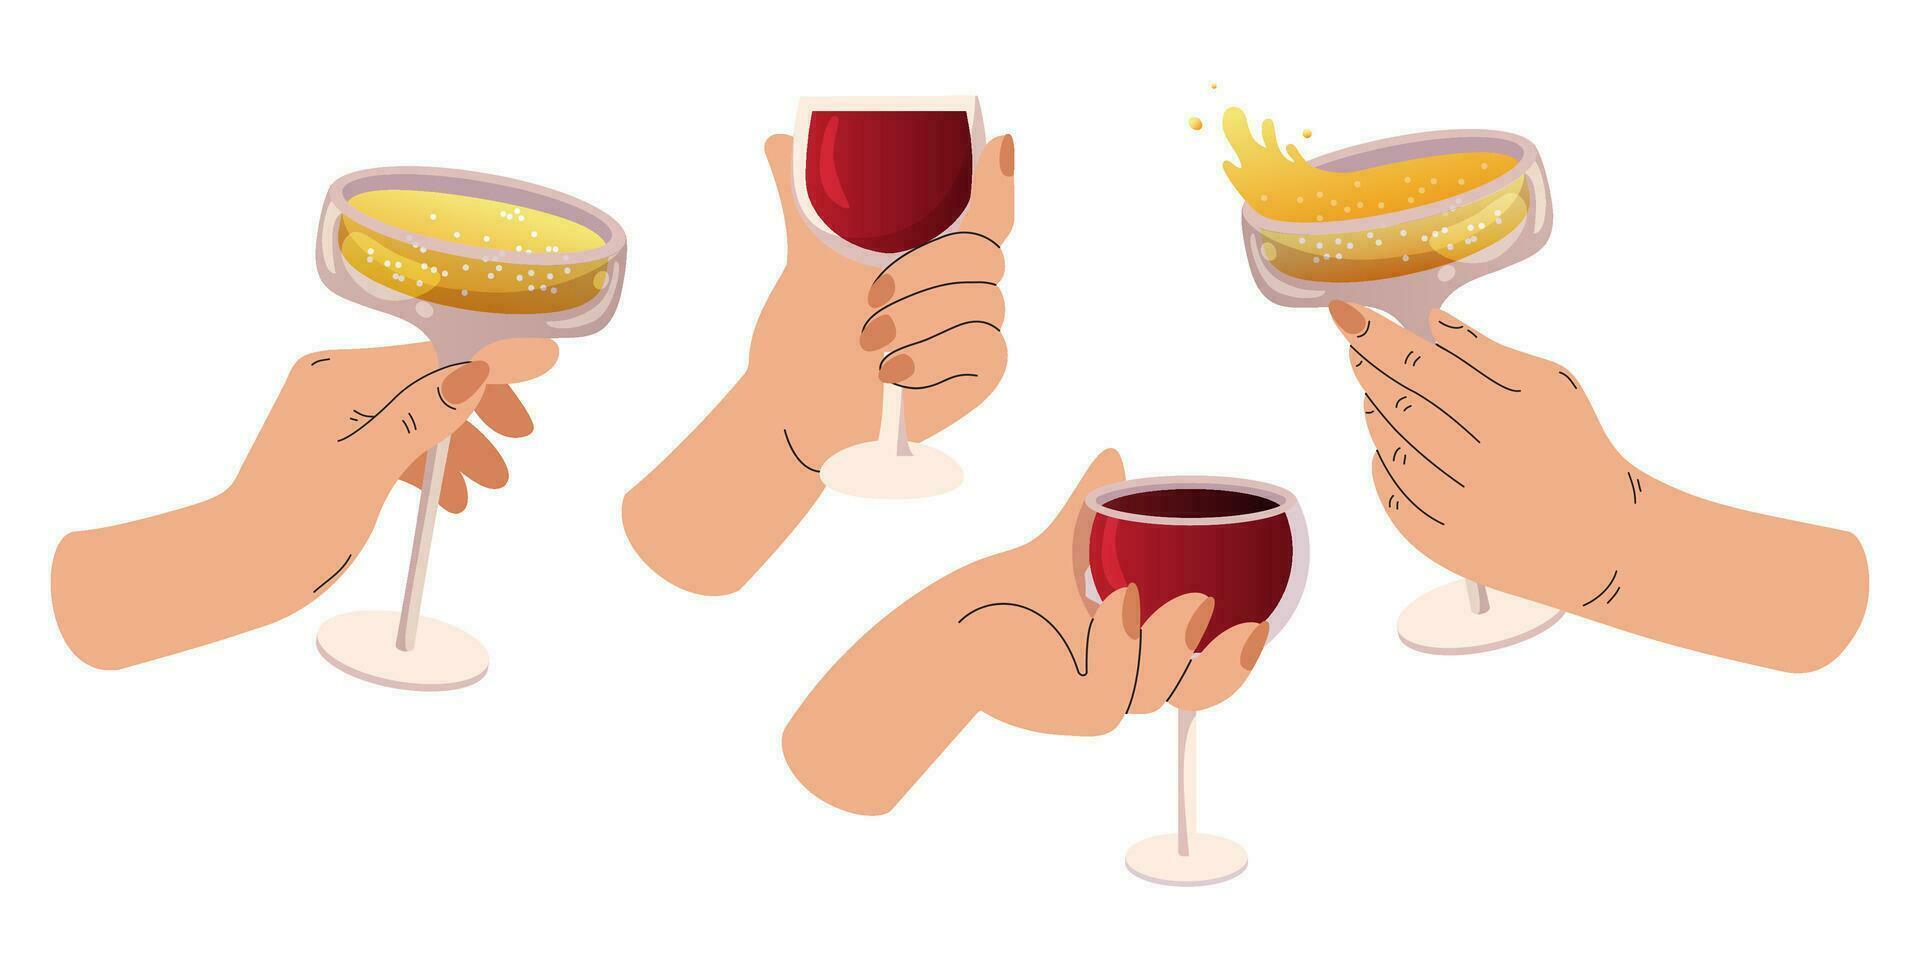 Hands hold champagne and cocktail glass clink set. Festive card champagne and wine for the New Year. Cheers celebration concept. Festive illustration for Christmas. Vector flat illustration.